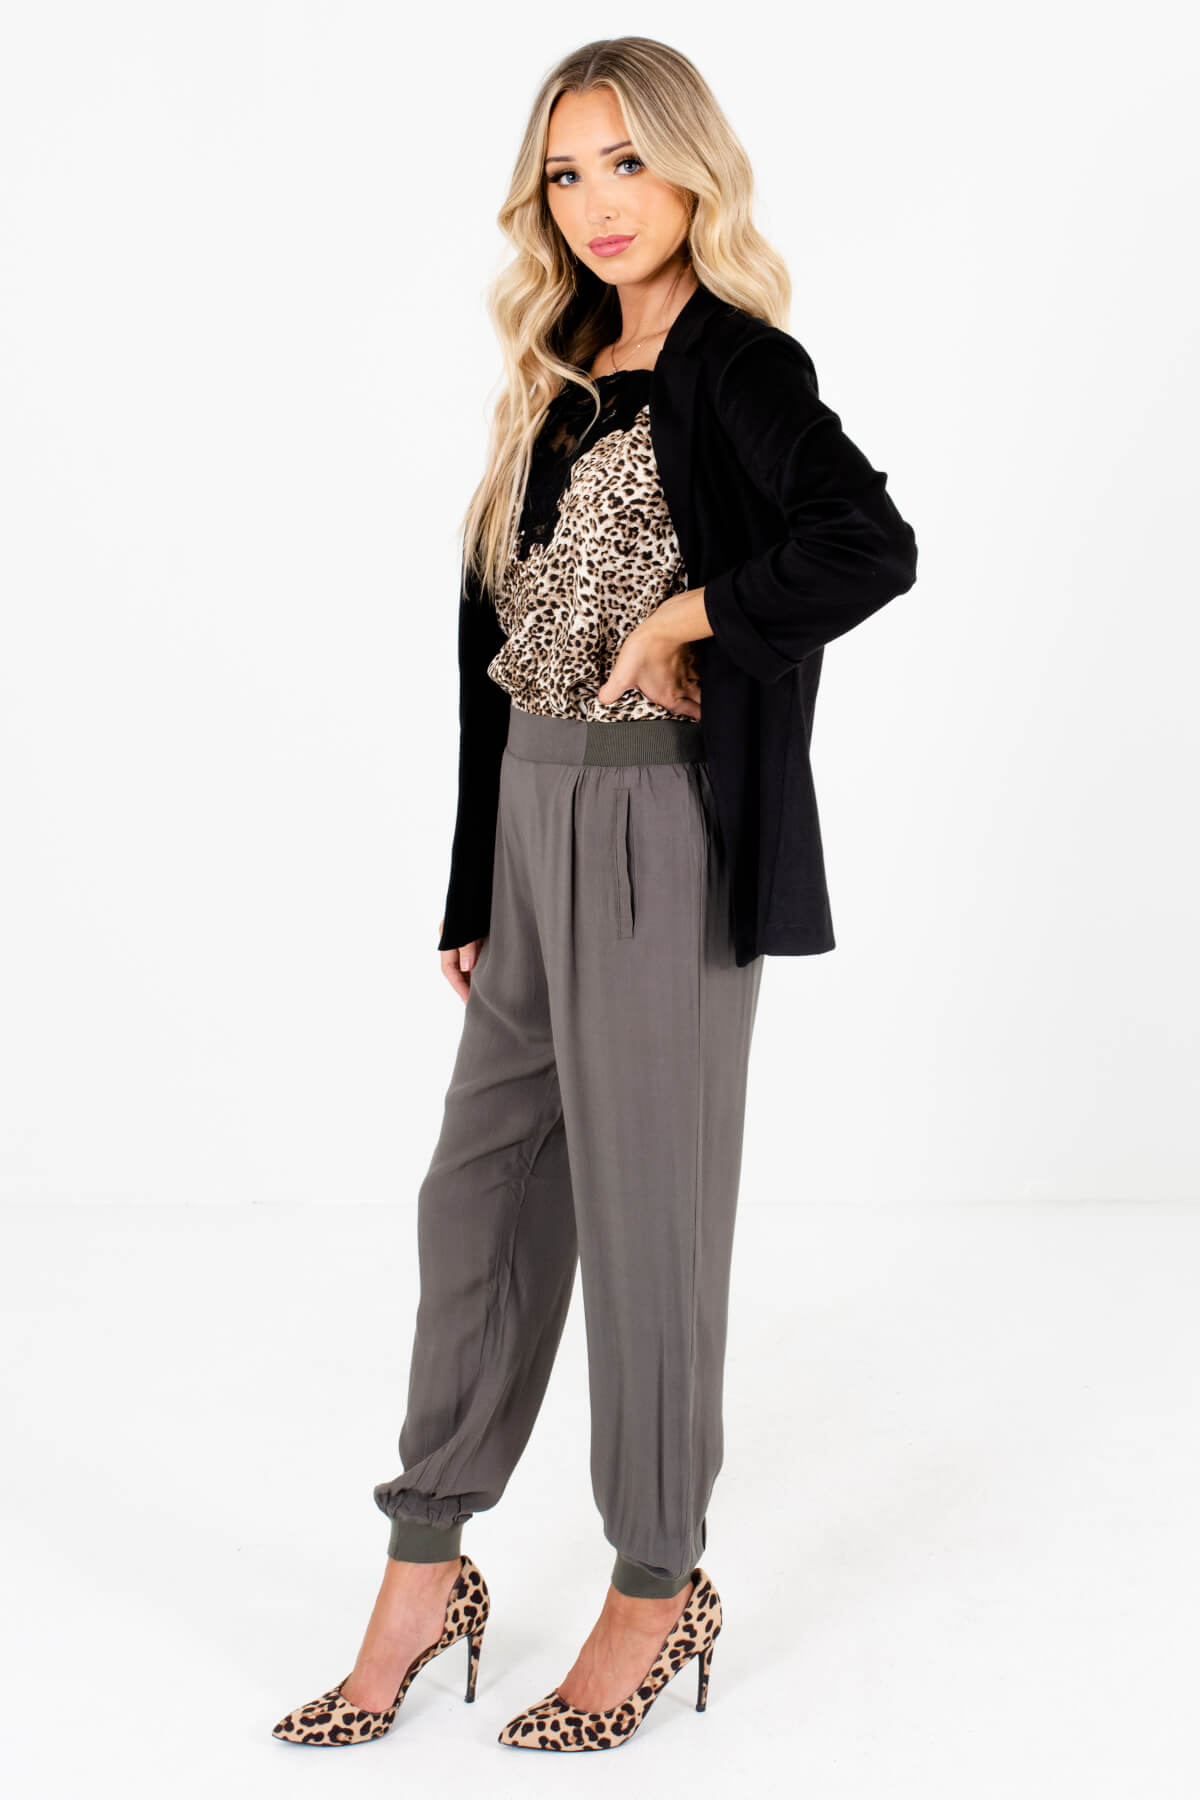 Women's Olive Green Business Casual Boutique Pants